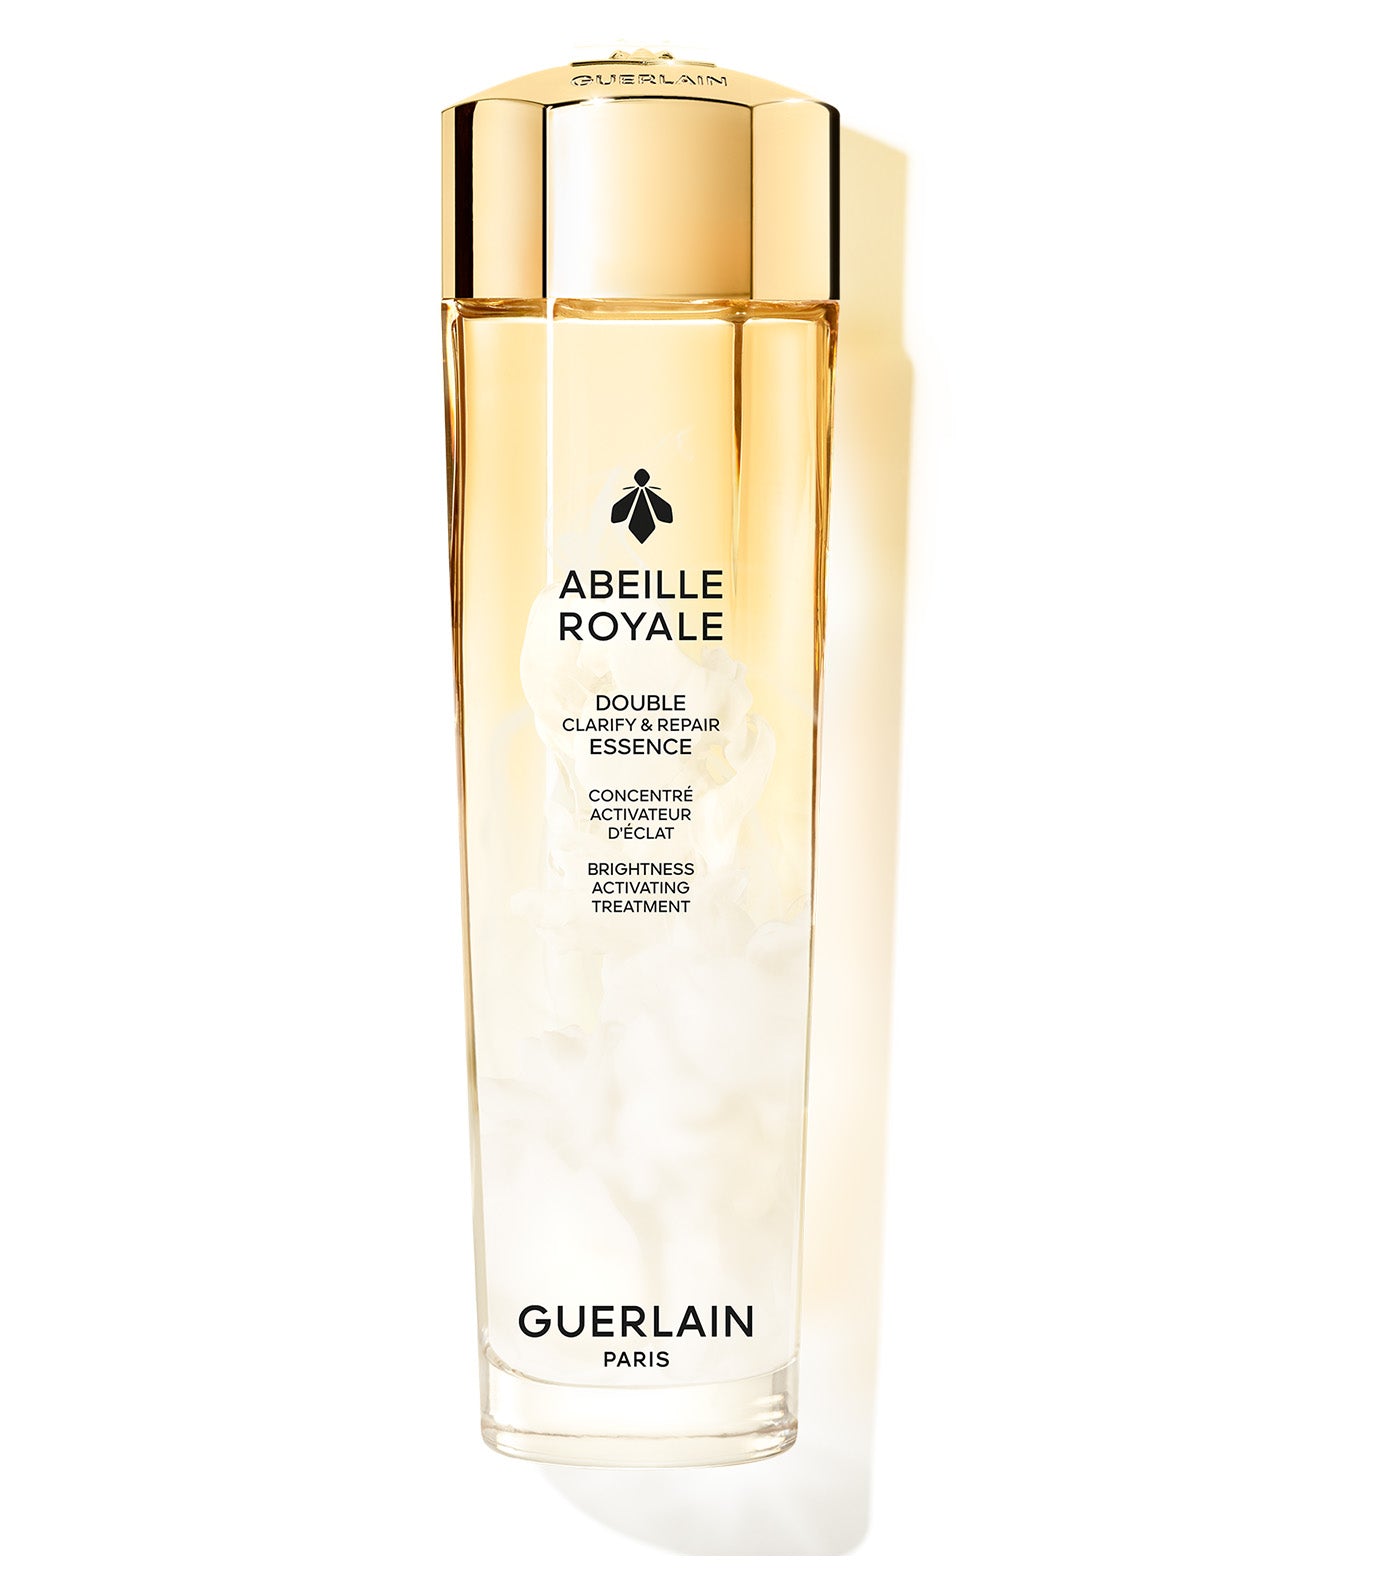 Abeille Royale Double Clarify and Repair Essence